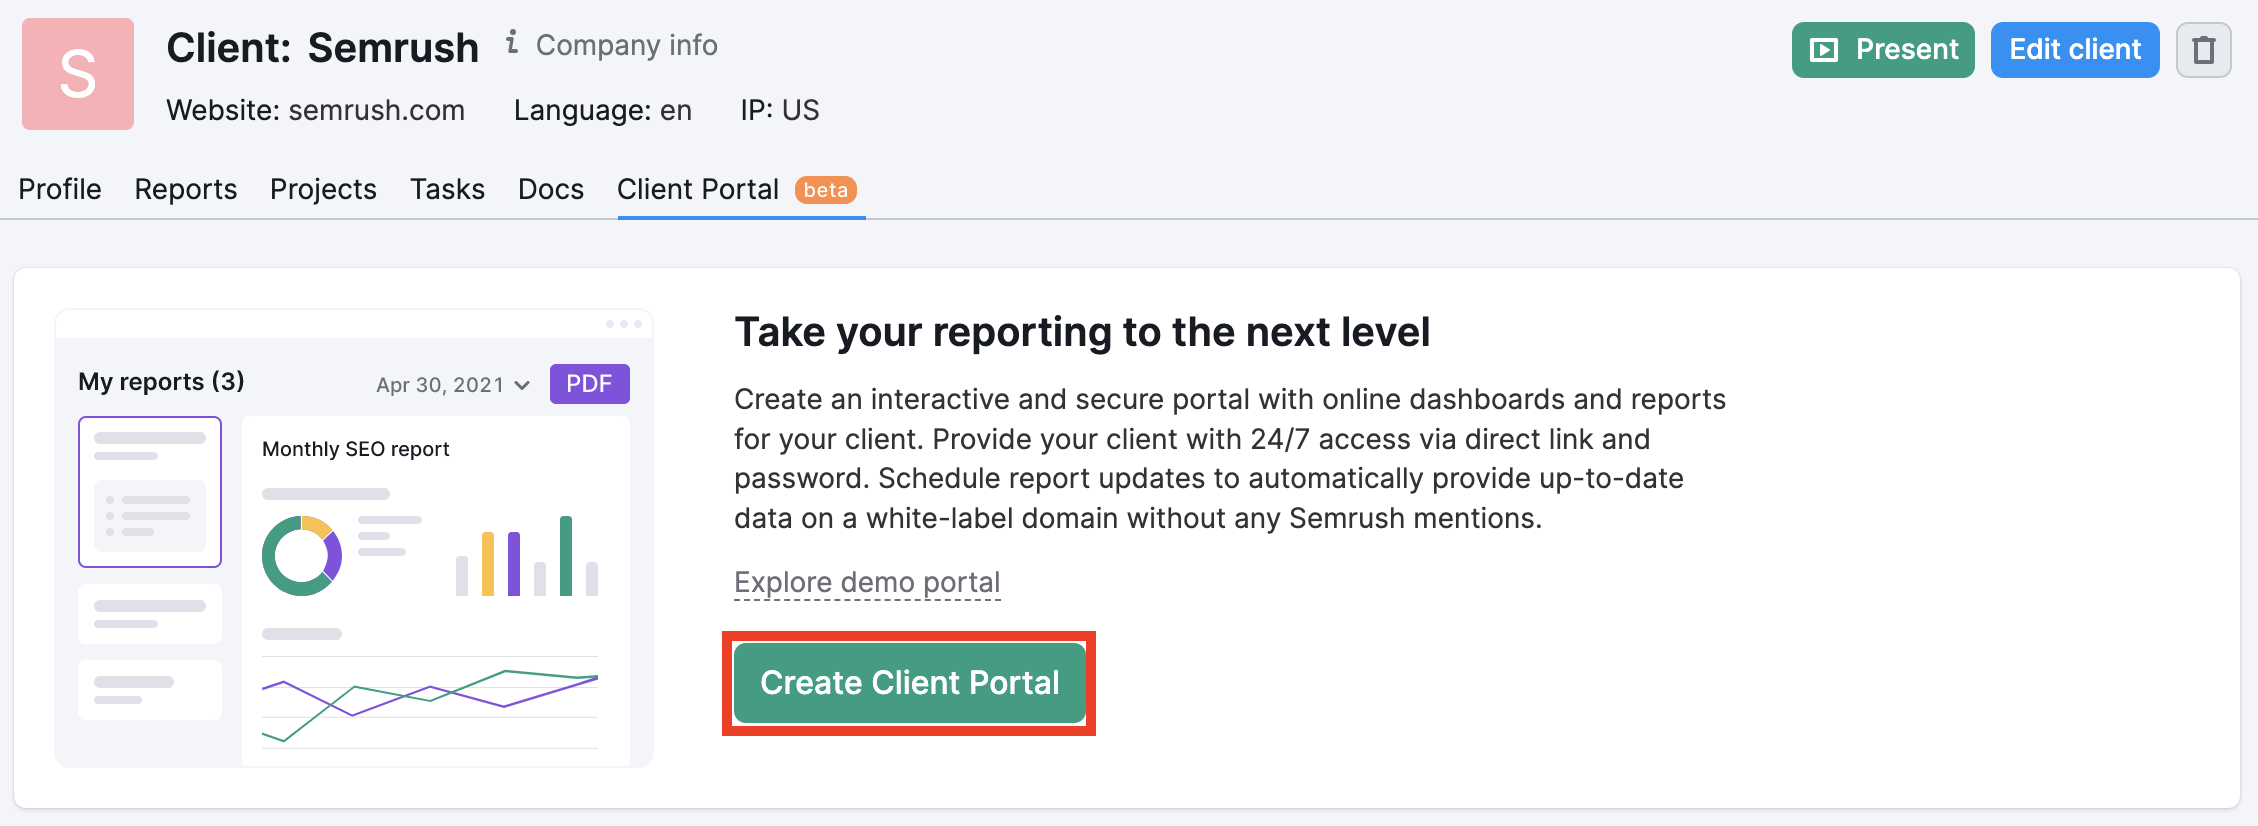 Report Automation with Semrush image 5